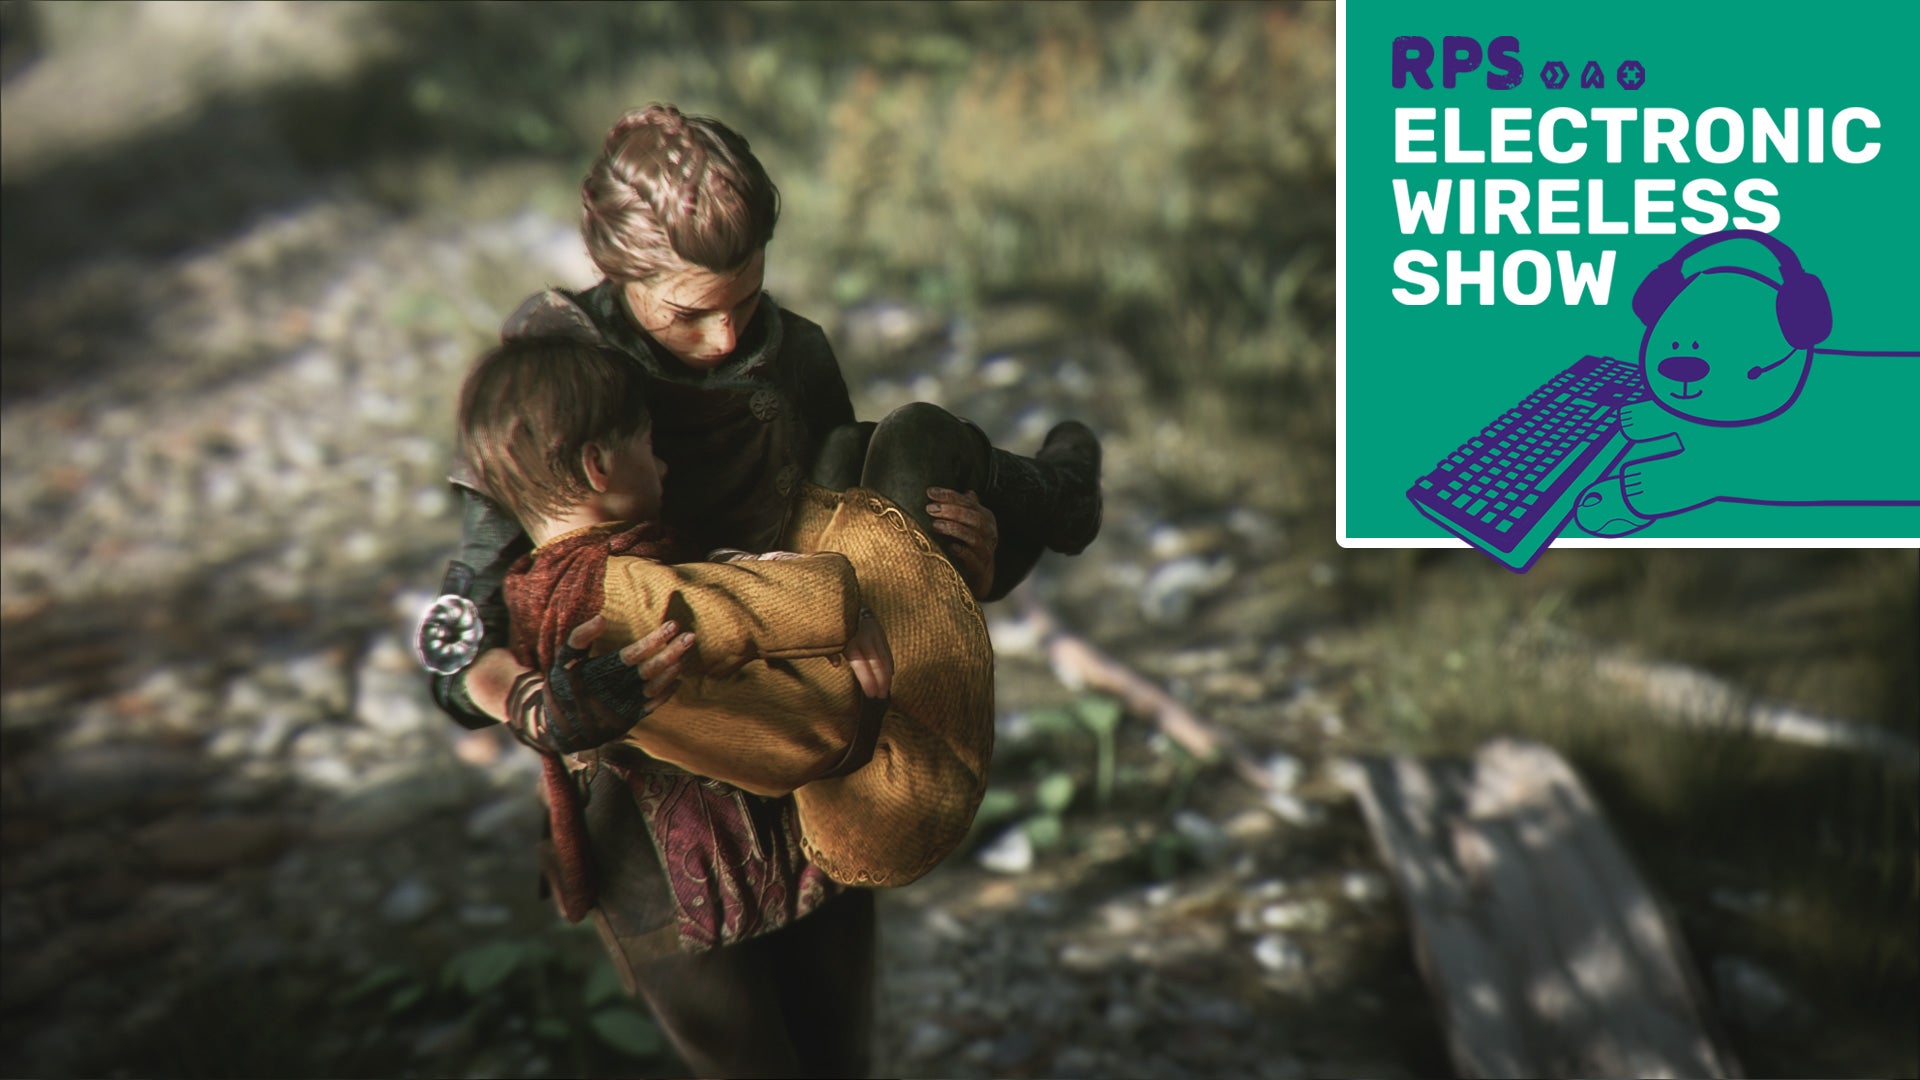 Amicia from A Plague Tale: Innocence carrying her little brother Hugo, with the Electronic Wireless Show logo in the top right hand corner